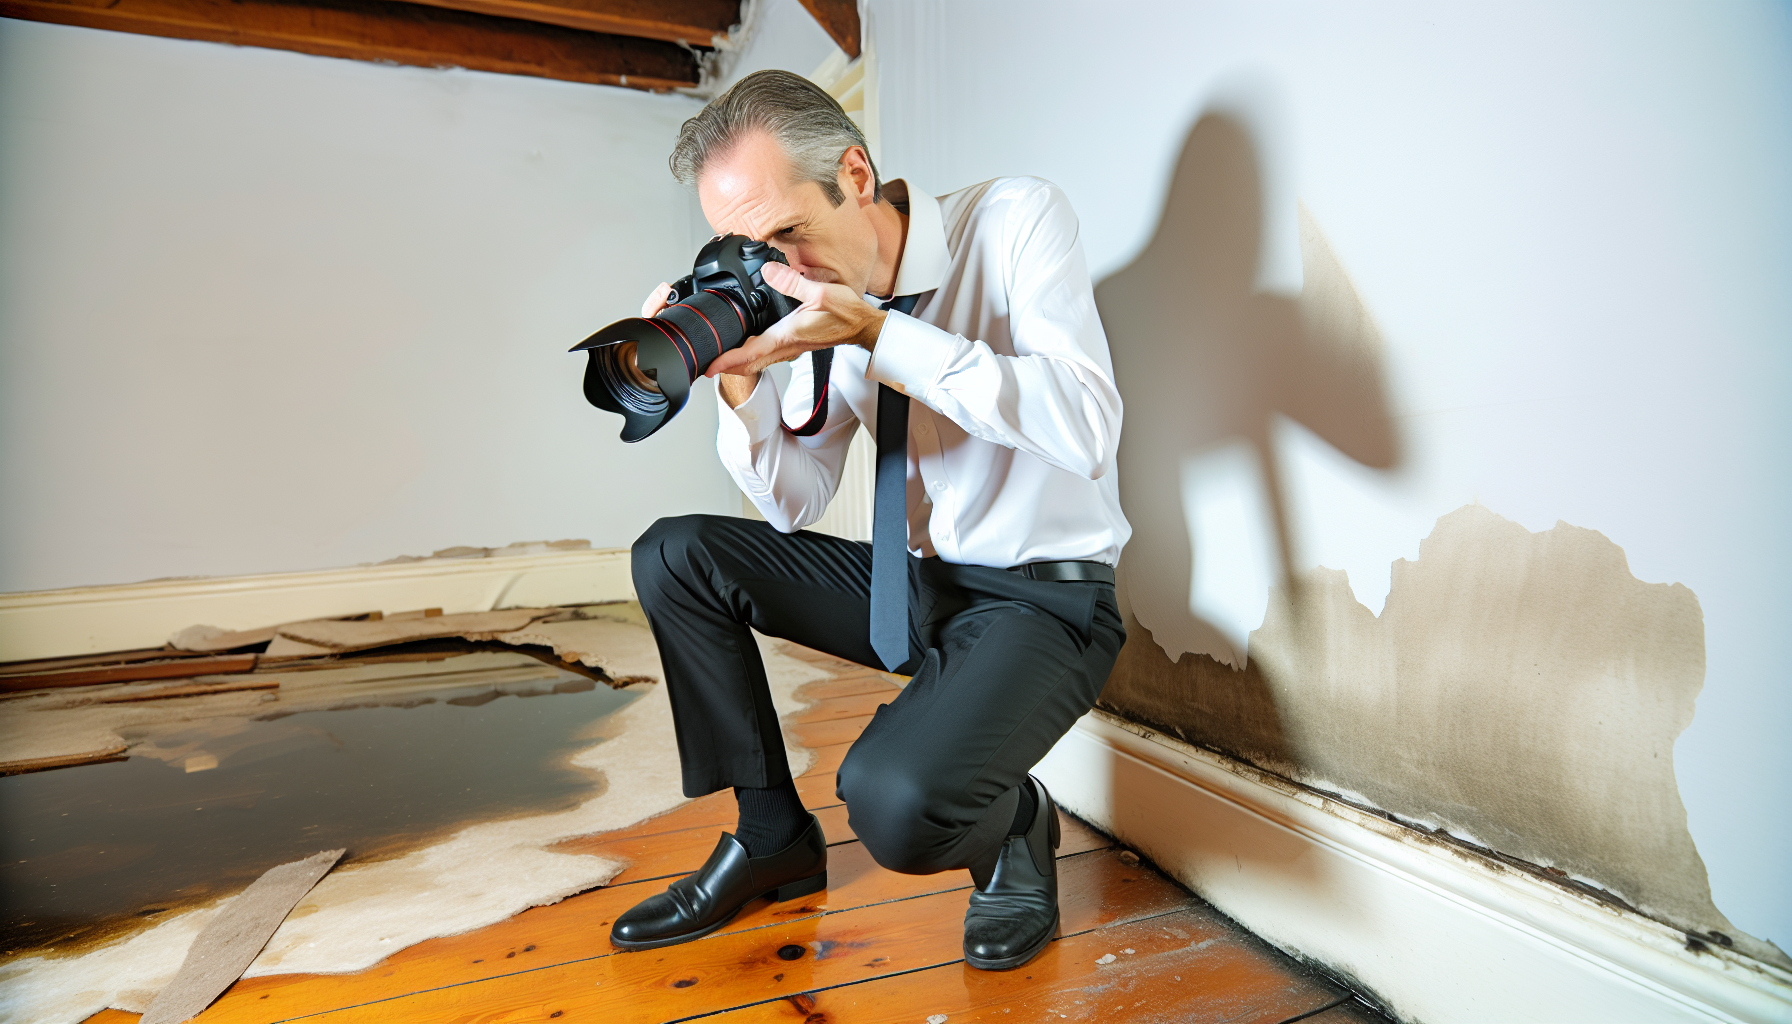 Taking photos of water damage for insurance documentation